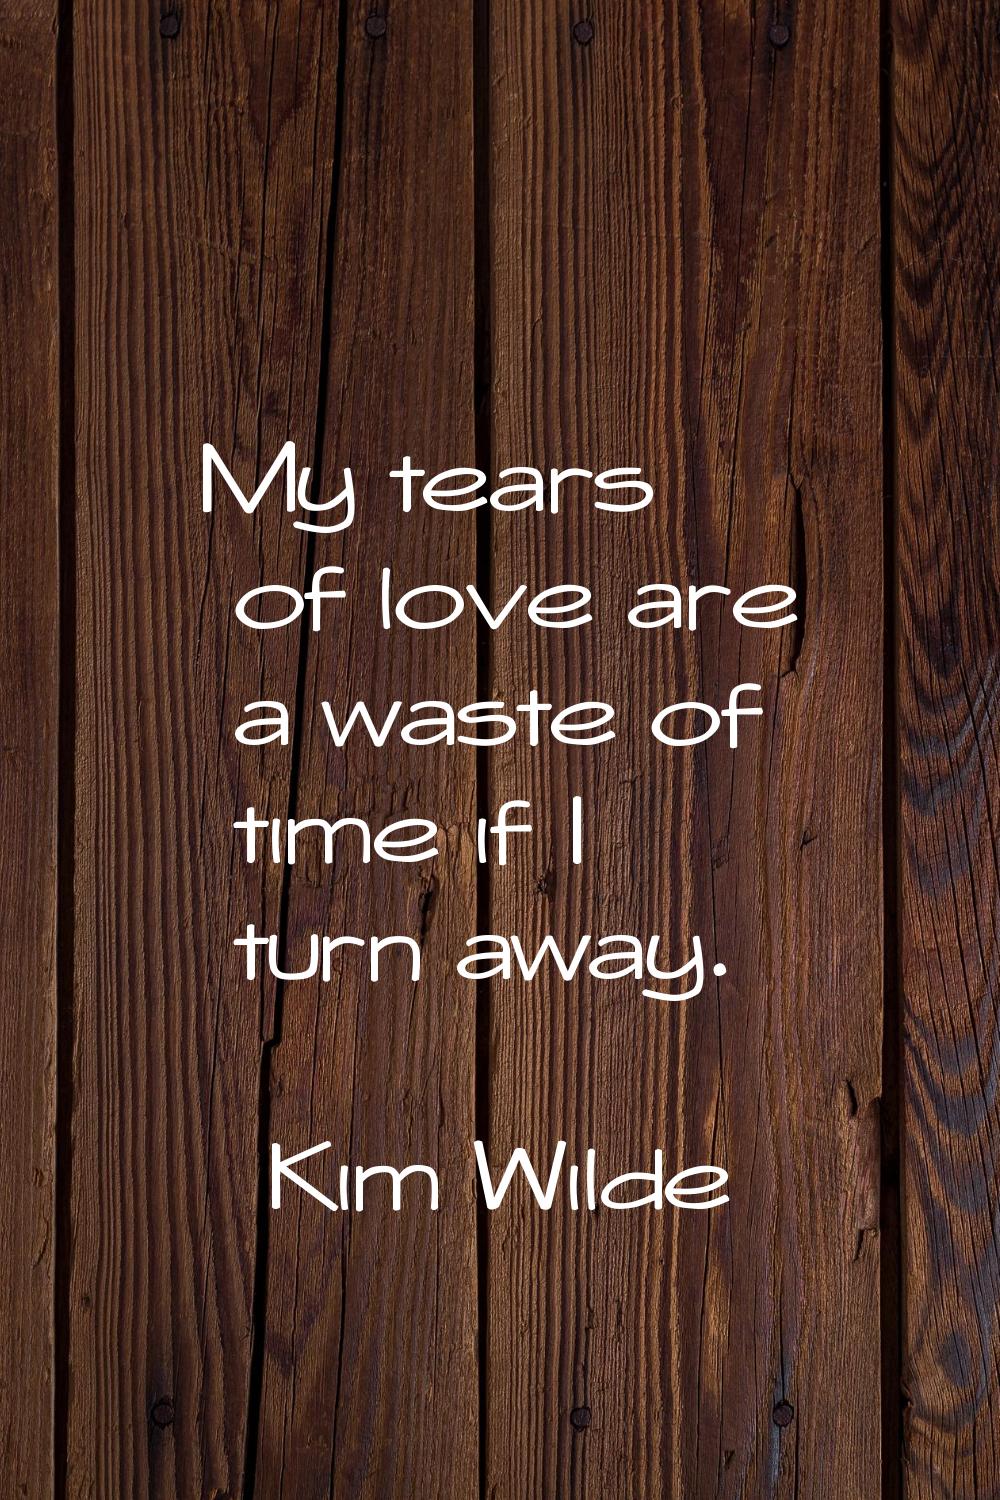 My tears of love are a waste of time if I turn away.